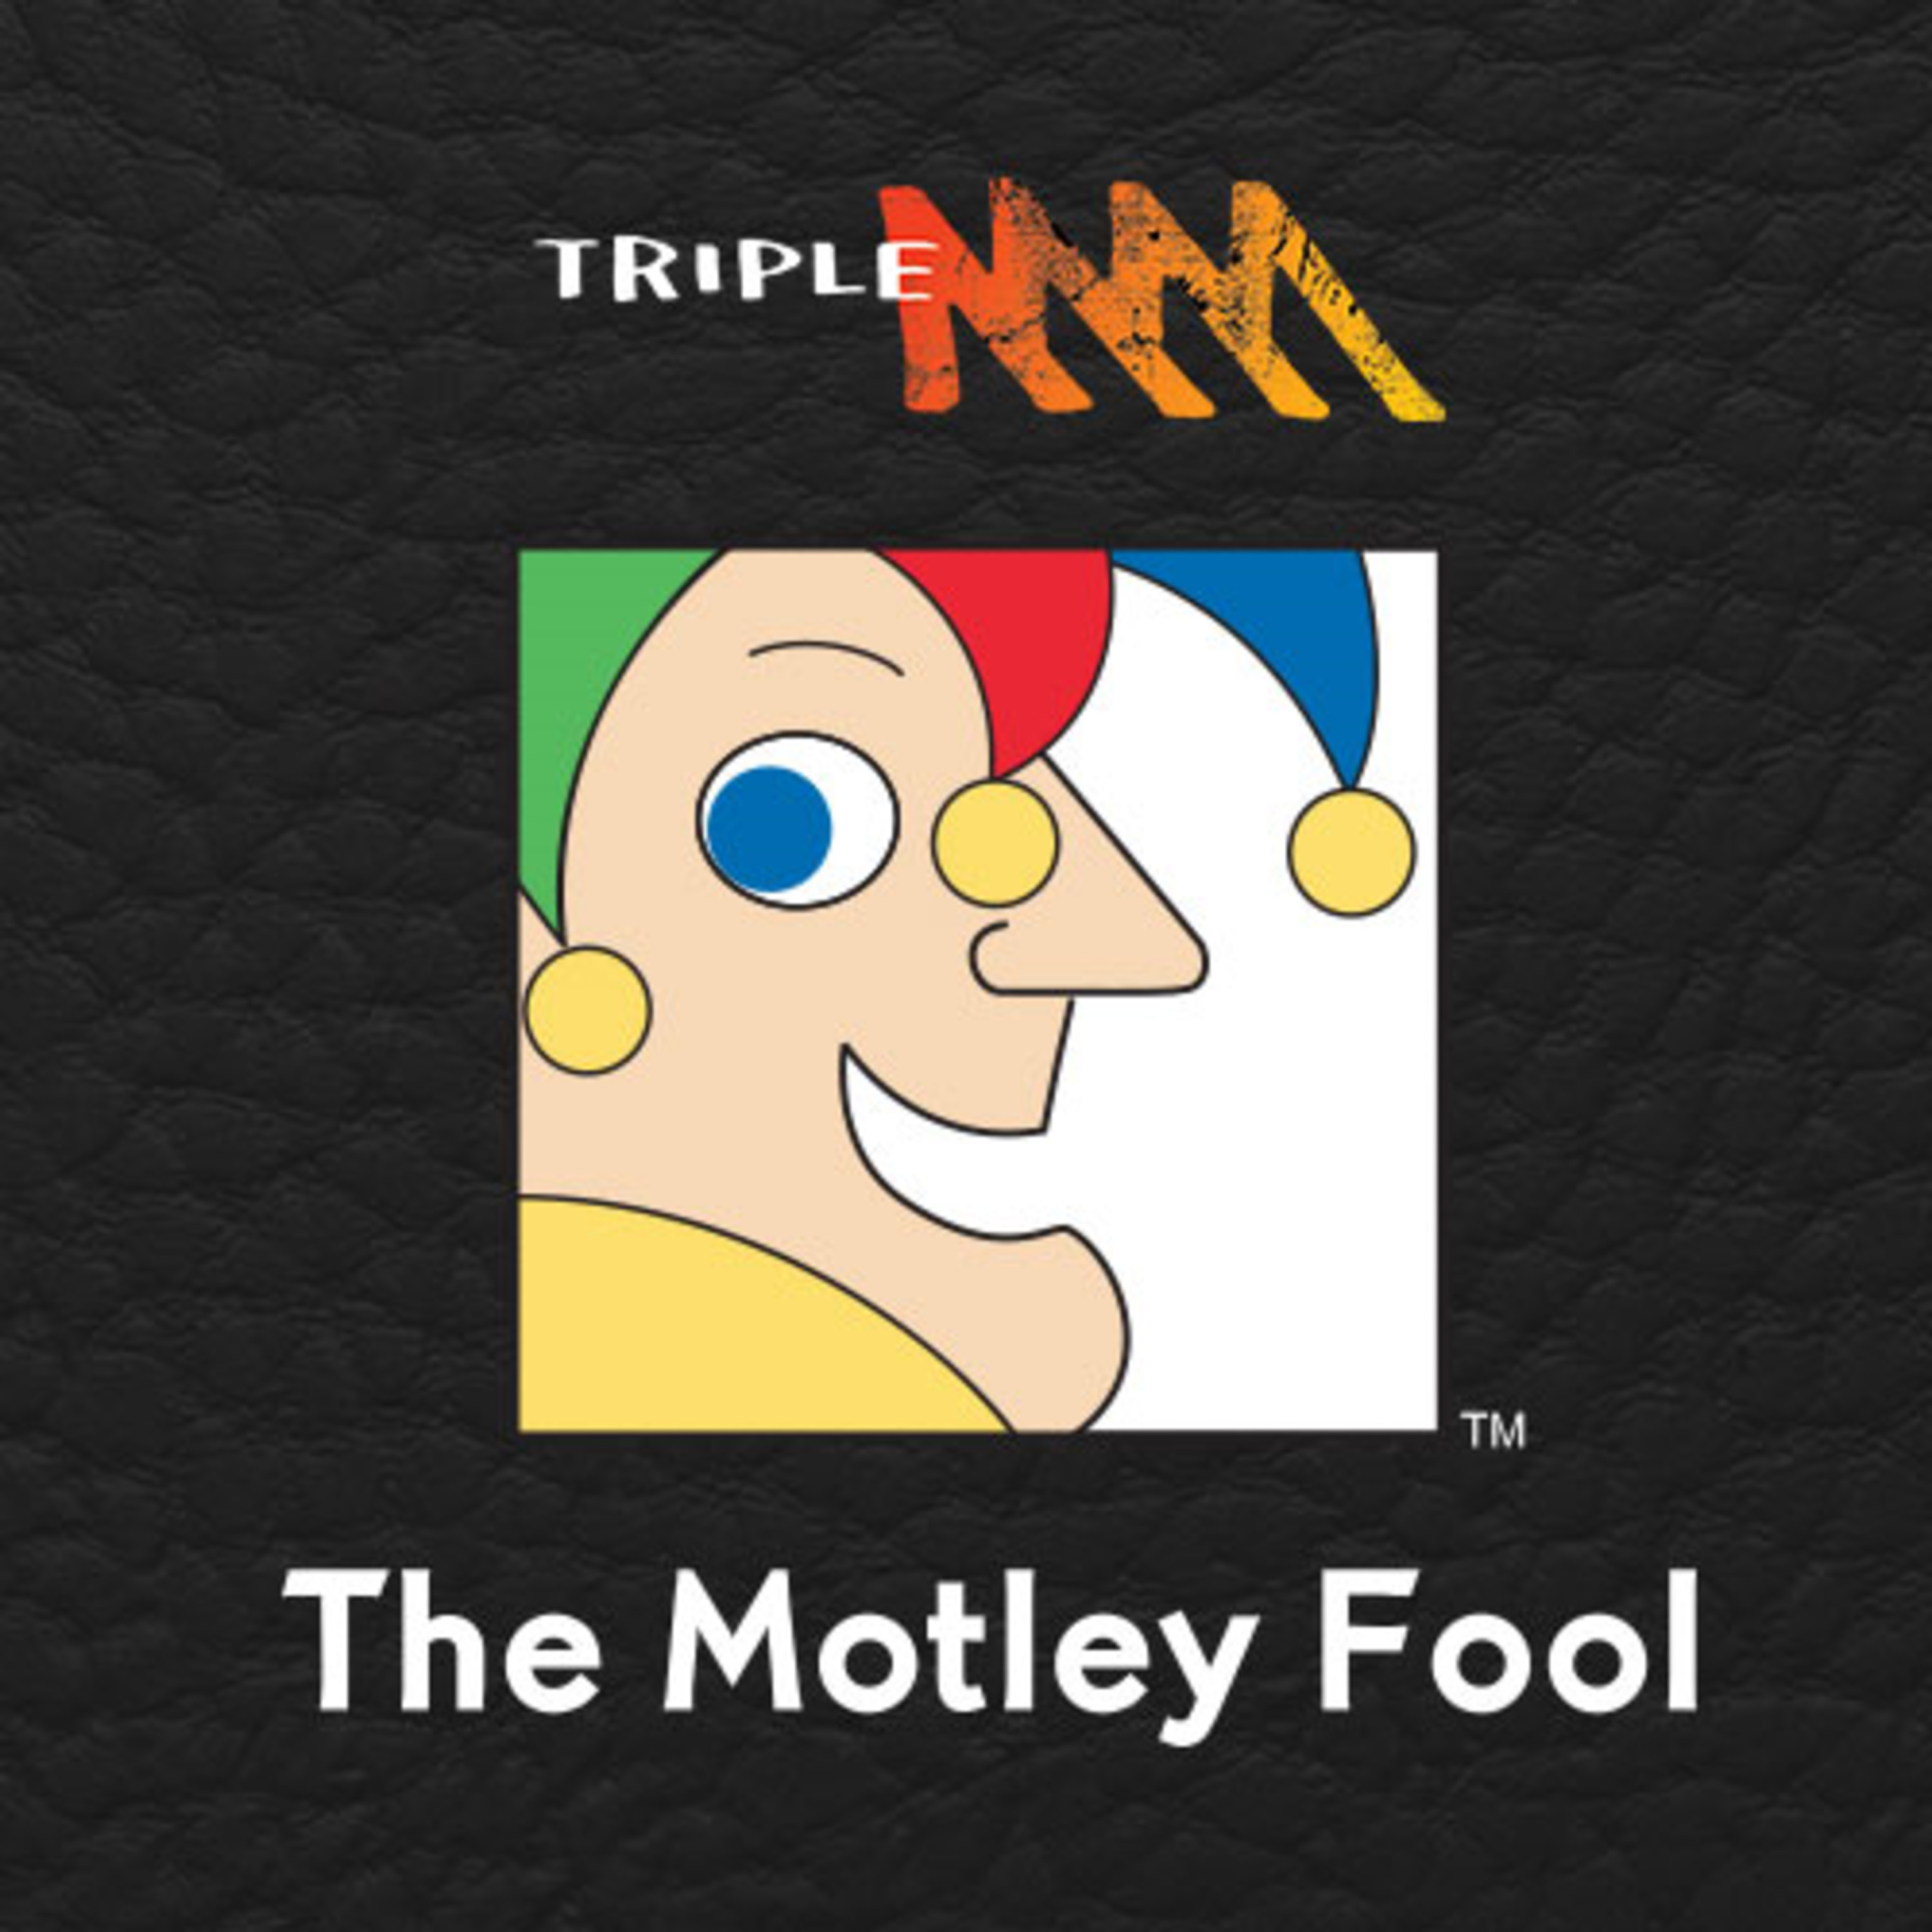 TPG finds $1b, Apple joins the streaming wars, ethical investing won't save the world - Episode 177 September 13 - Triple M's Motley Fool Money